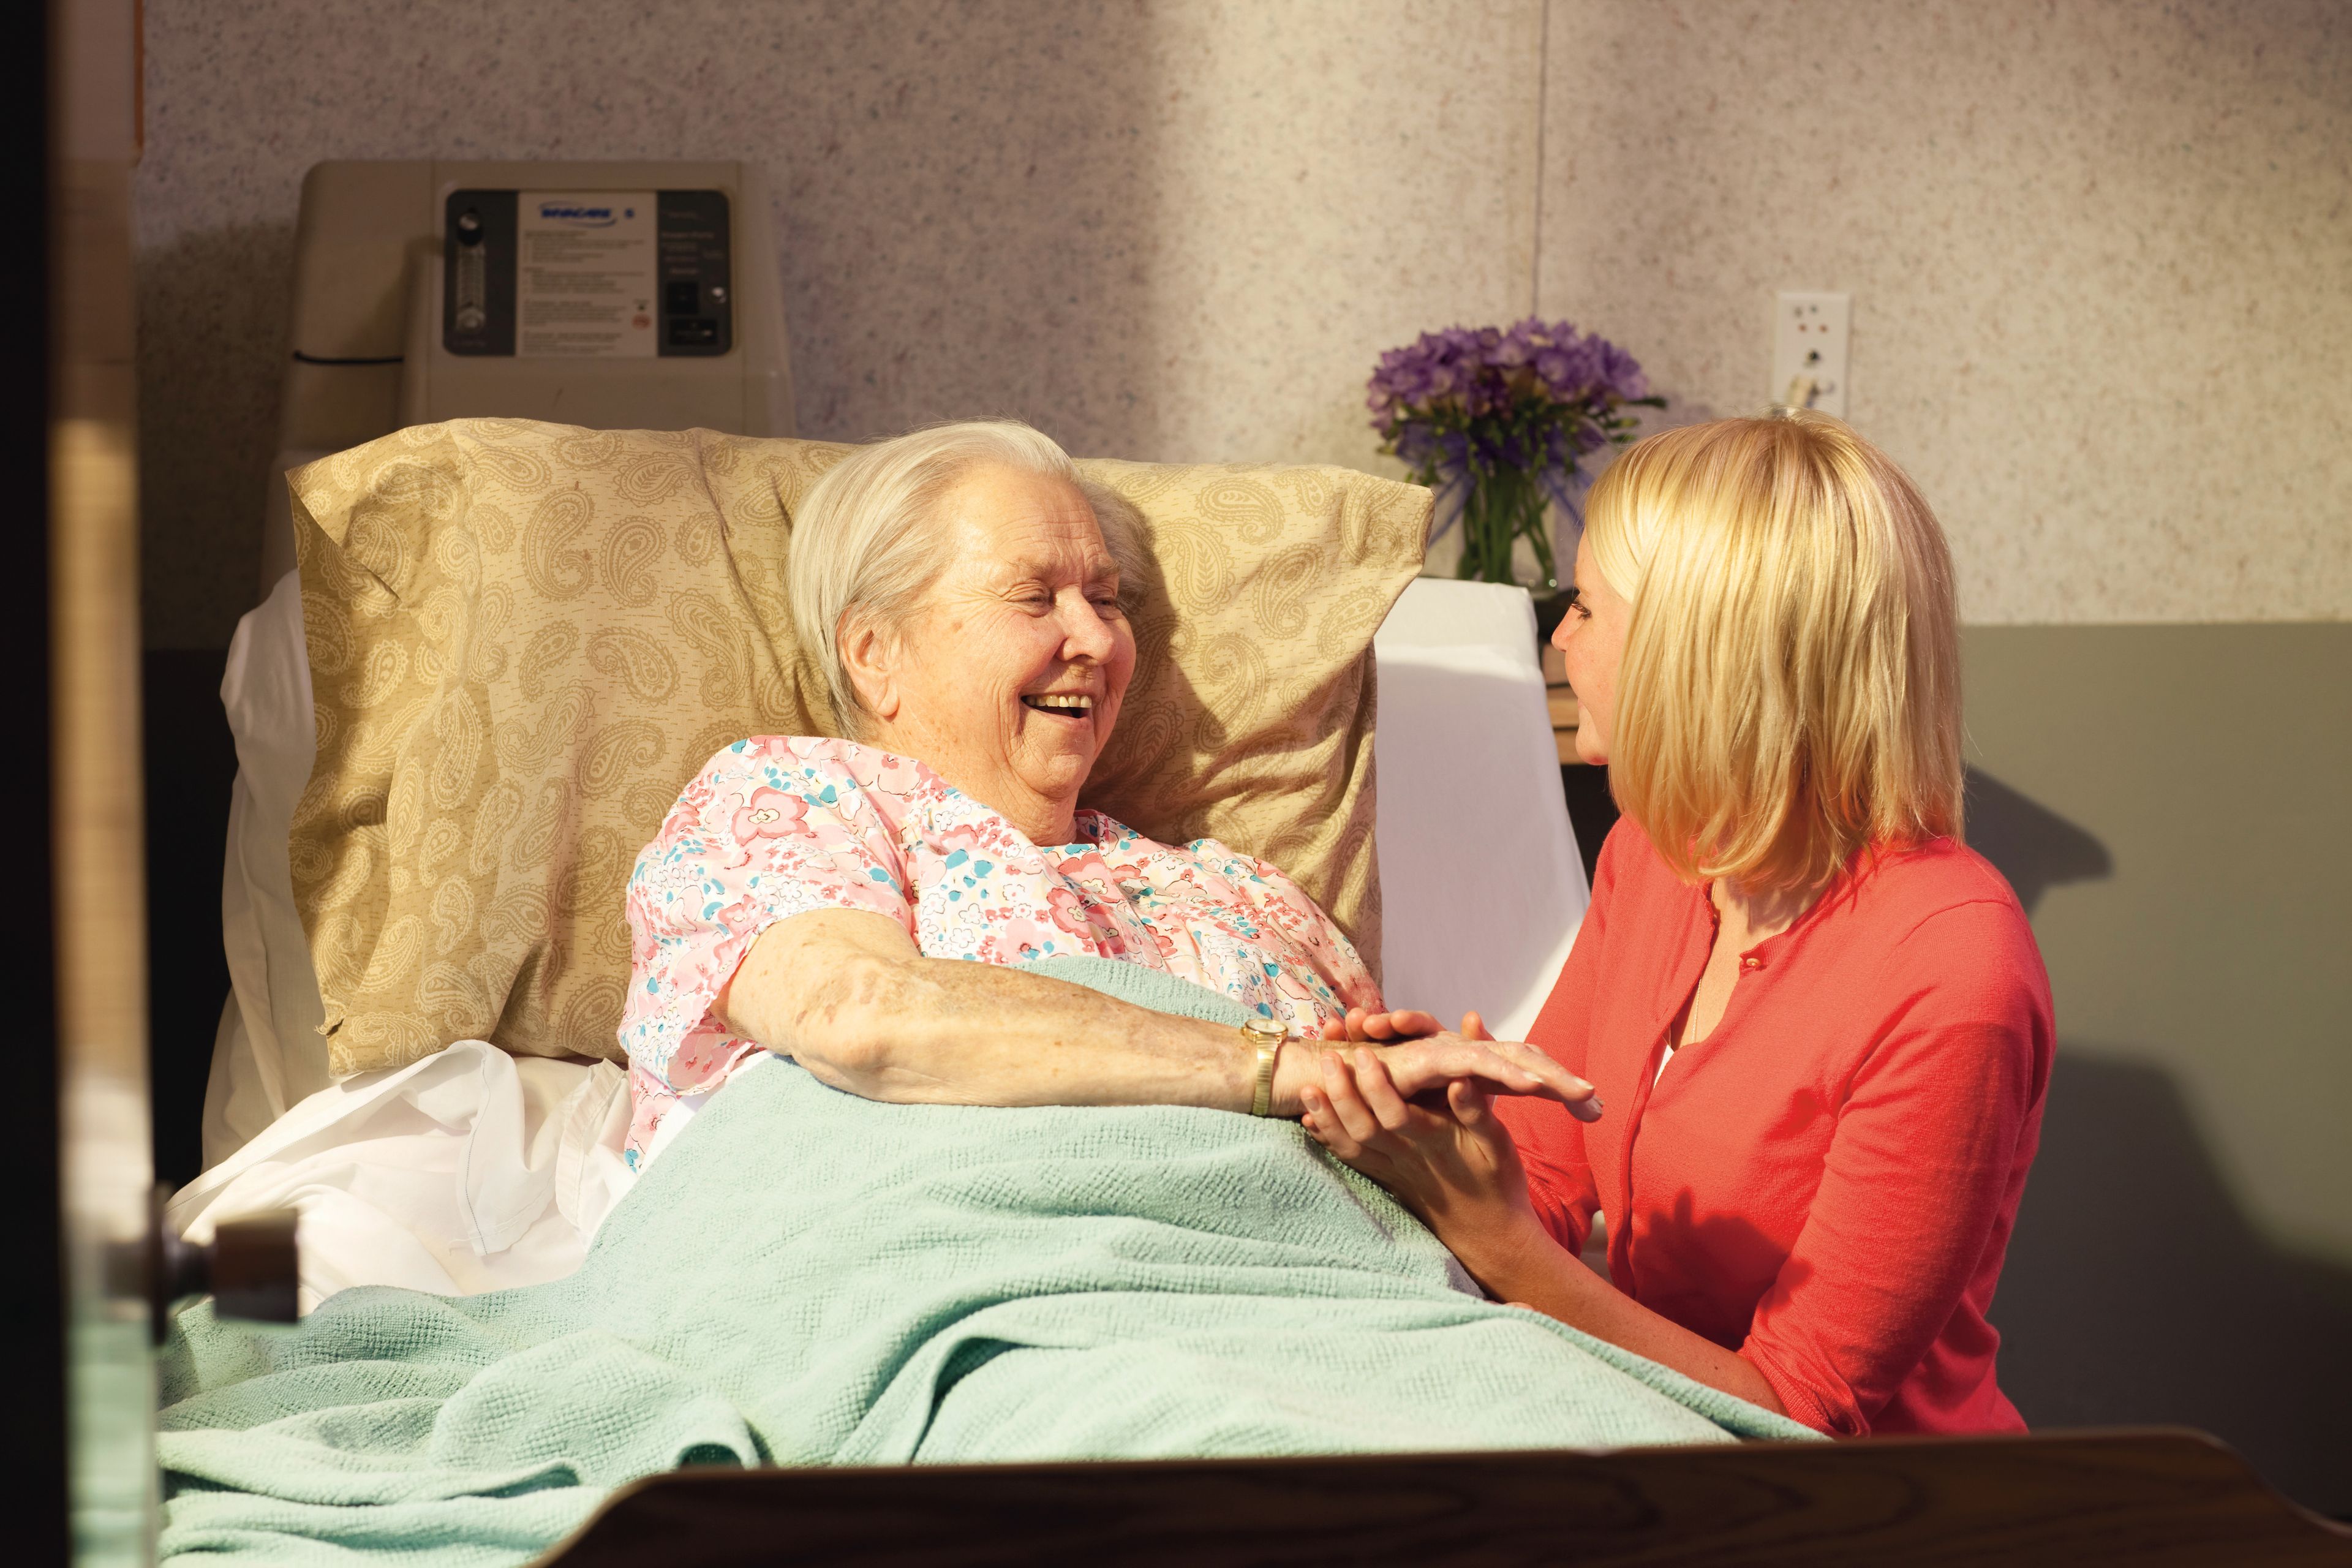 A young woman visits an elderly woman in the hospital.